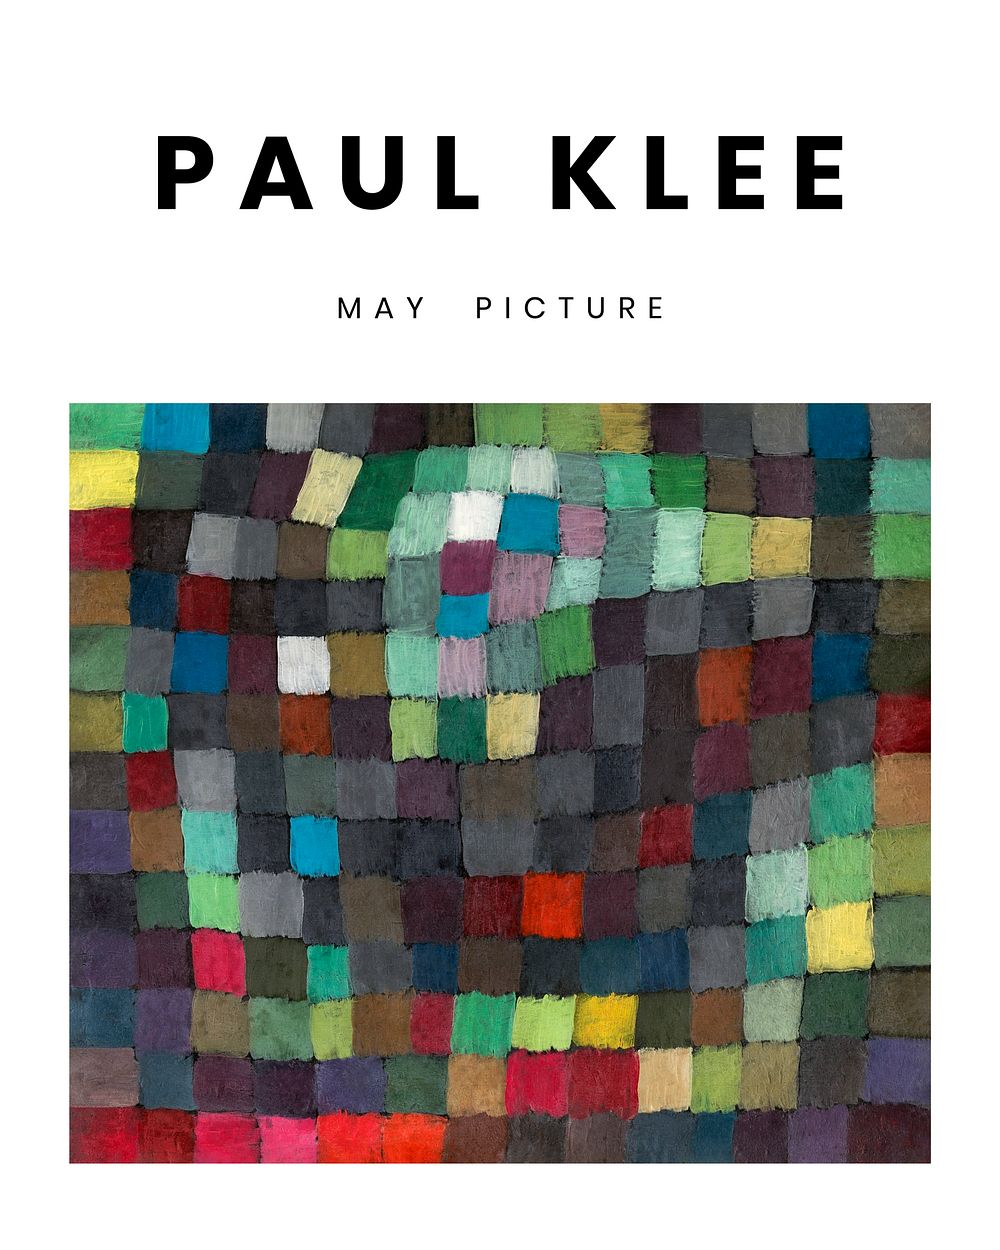 Paul Klee printable poster, famous May Picture abstract painting (1925). Original from The MET Museum. Digitally enhanced by…